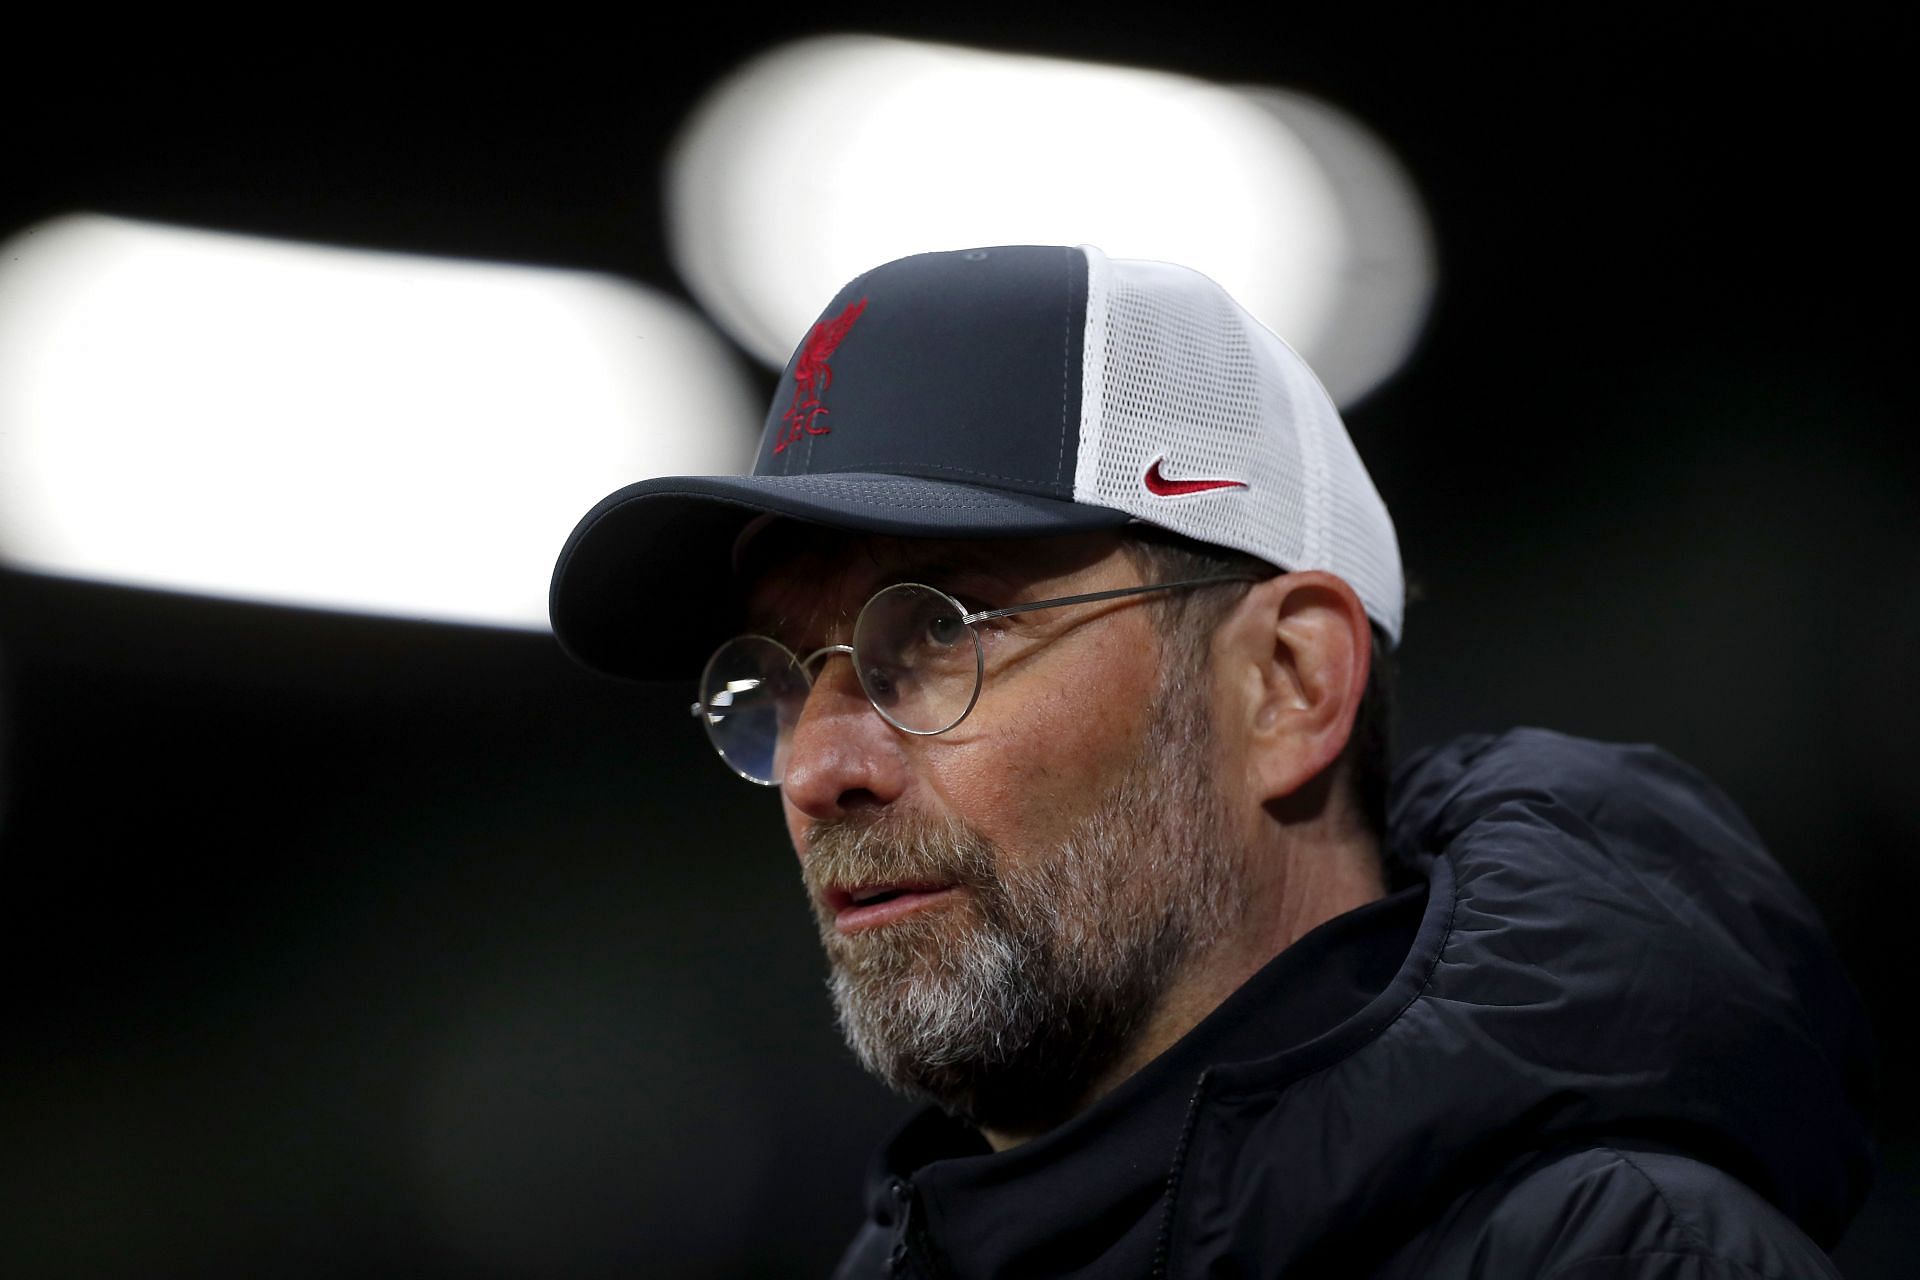 Jurgen Klopp has embodied Liverpool&#039;s spirit, and has made Anfield a formidable fortress during his tenure.